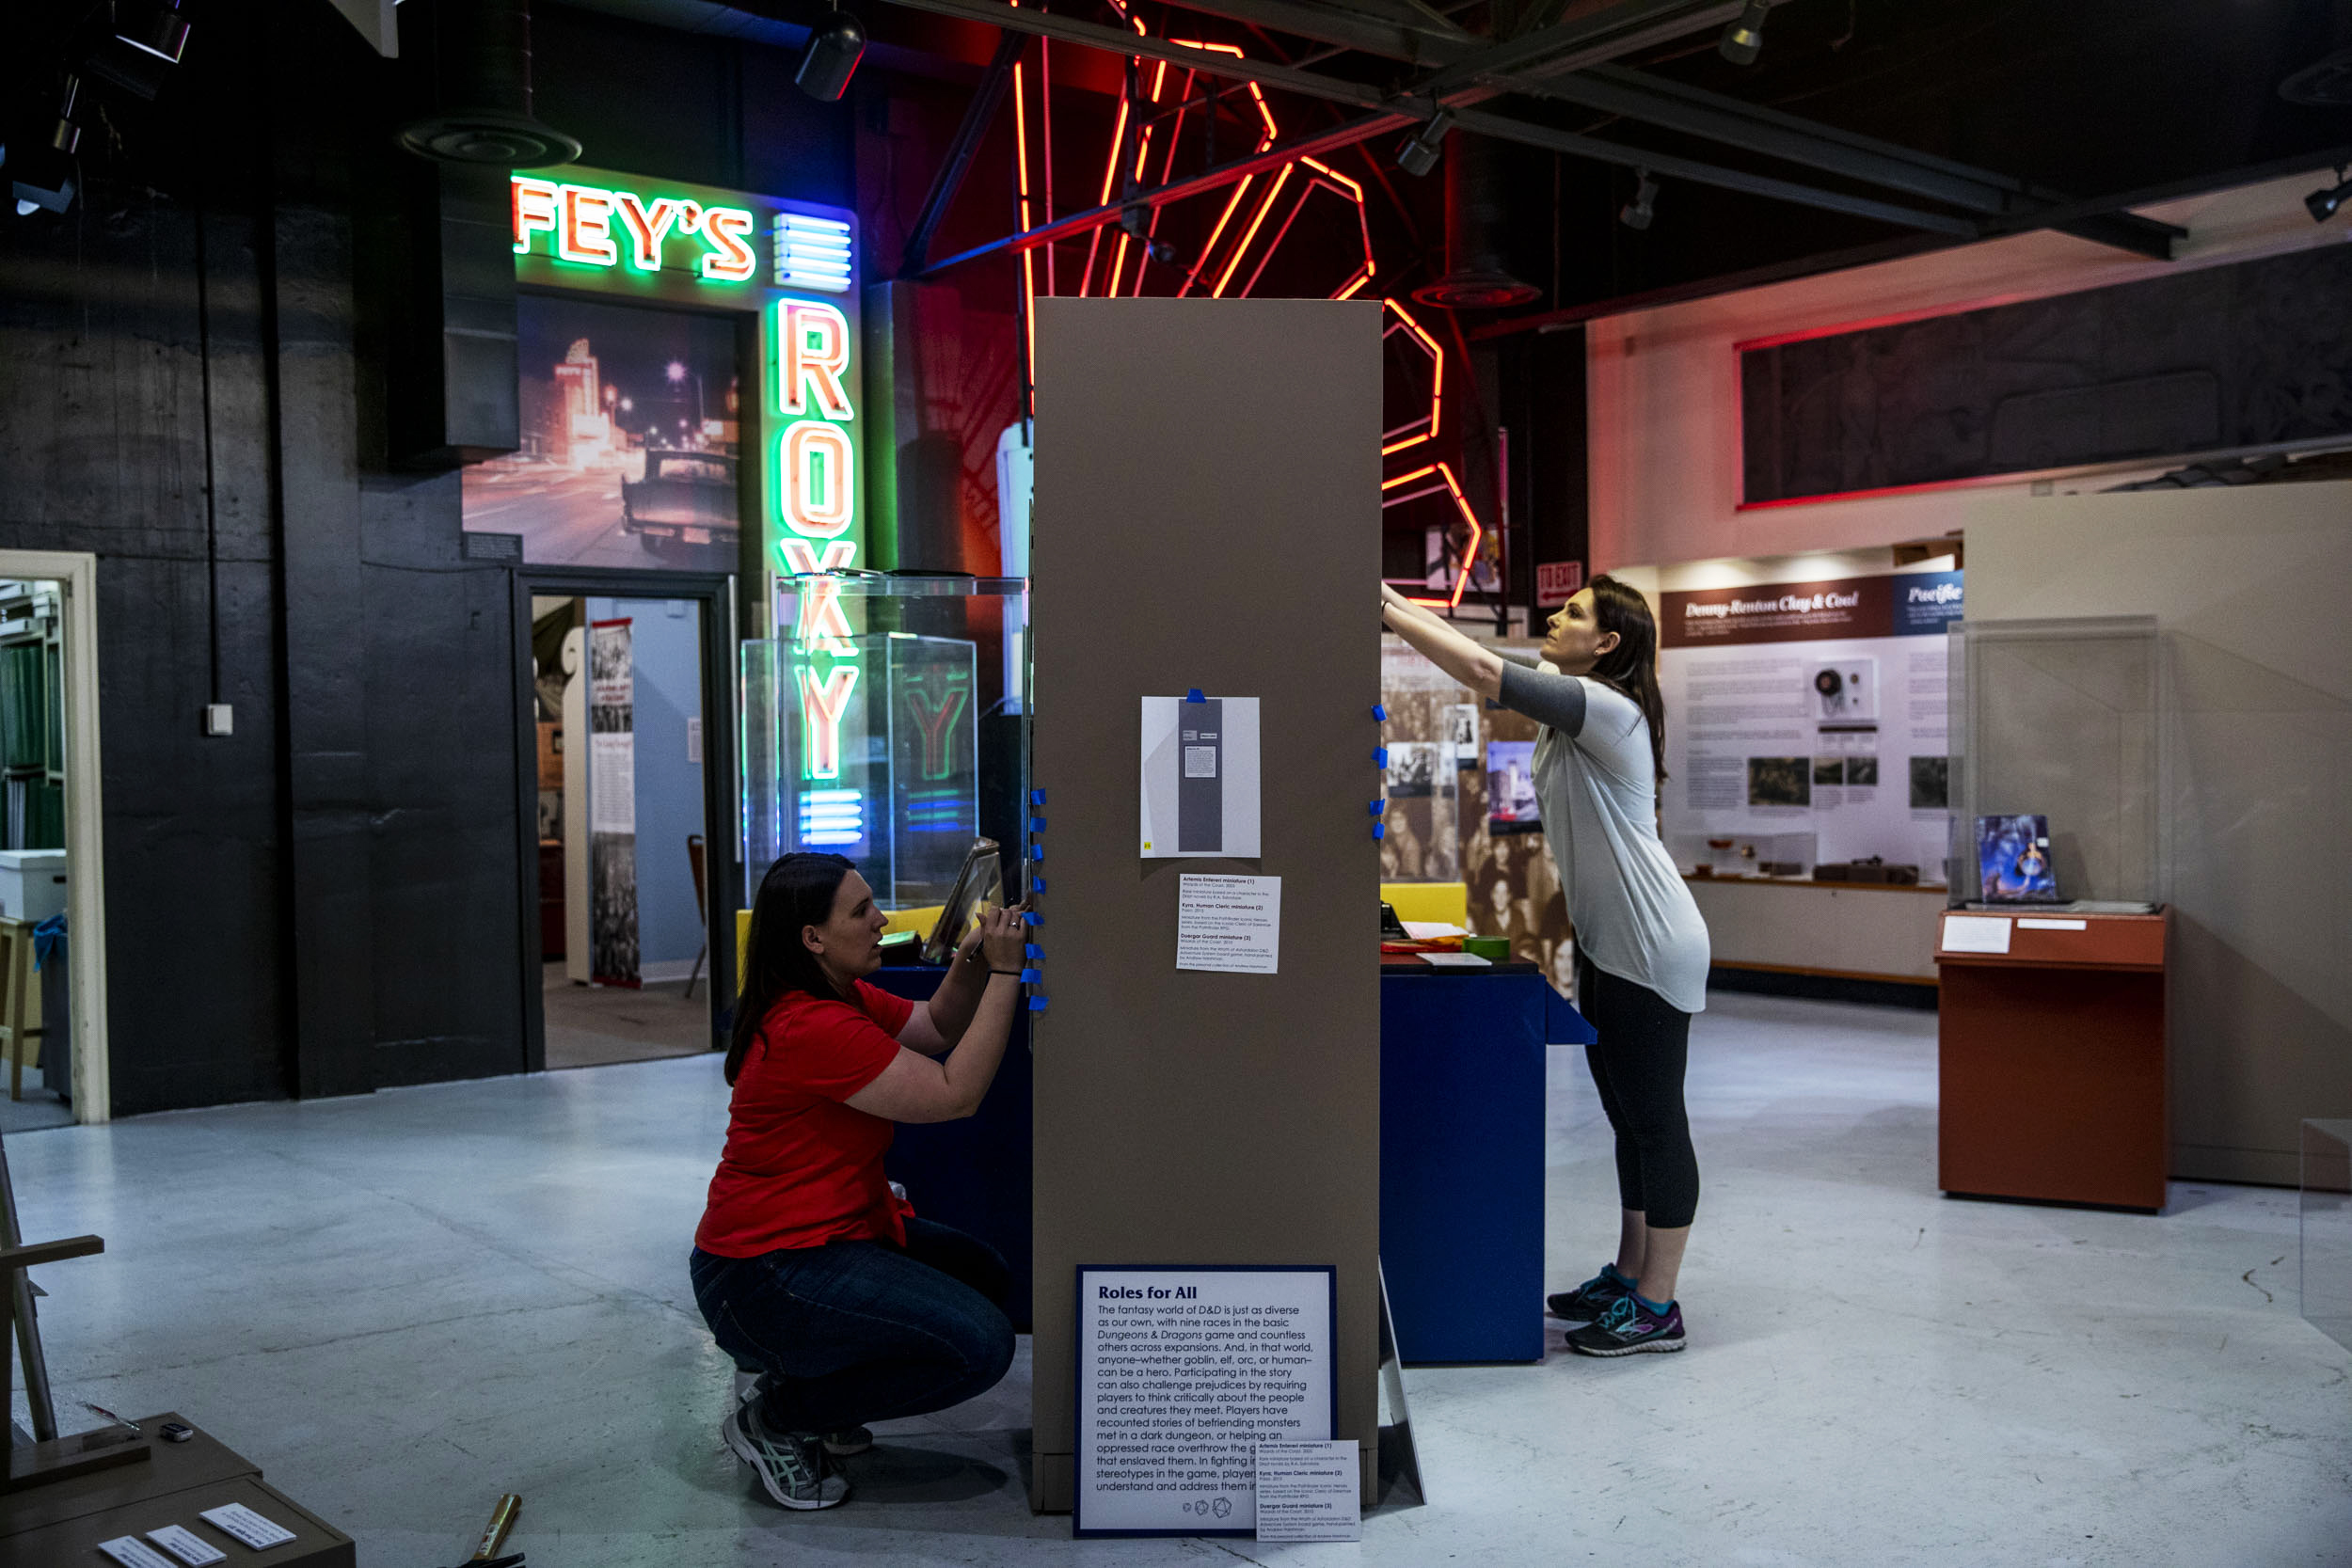 Renton History Museum curator Sarah Samson, right, and exhibit curator Allison Moore work on installing the museum's upcoming exhibit titled 'Hero's Feast: Finding Community through Dungeons and Dragons' on April 30, 2019. The exhibit will open on May 7. (Photo by Dorothy Edwards/Crosscut)